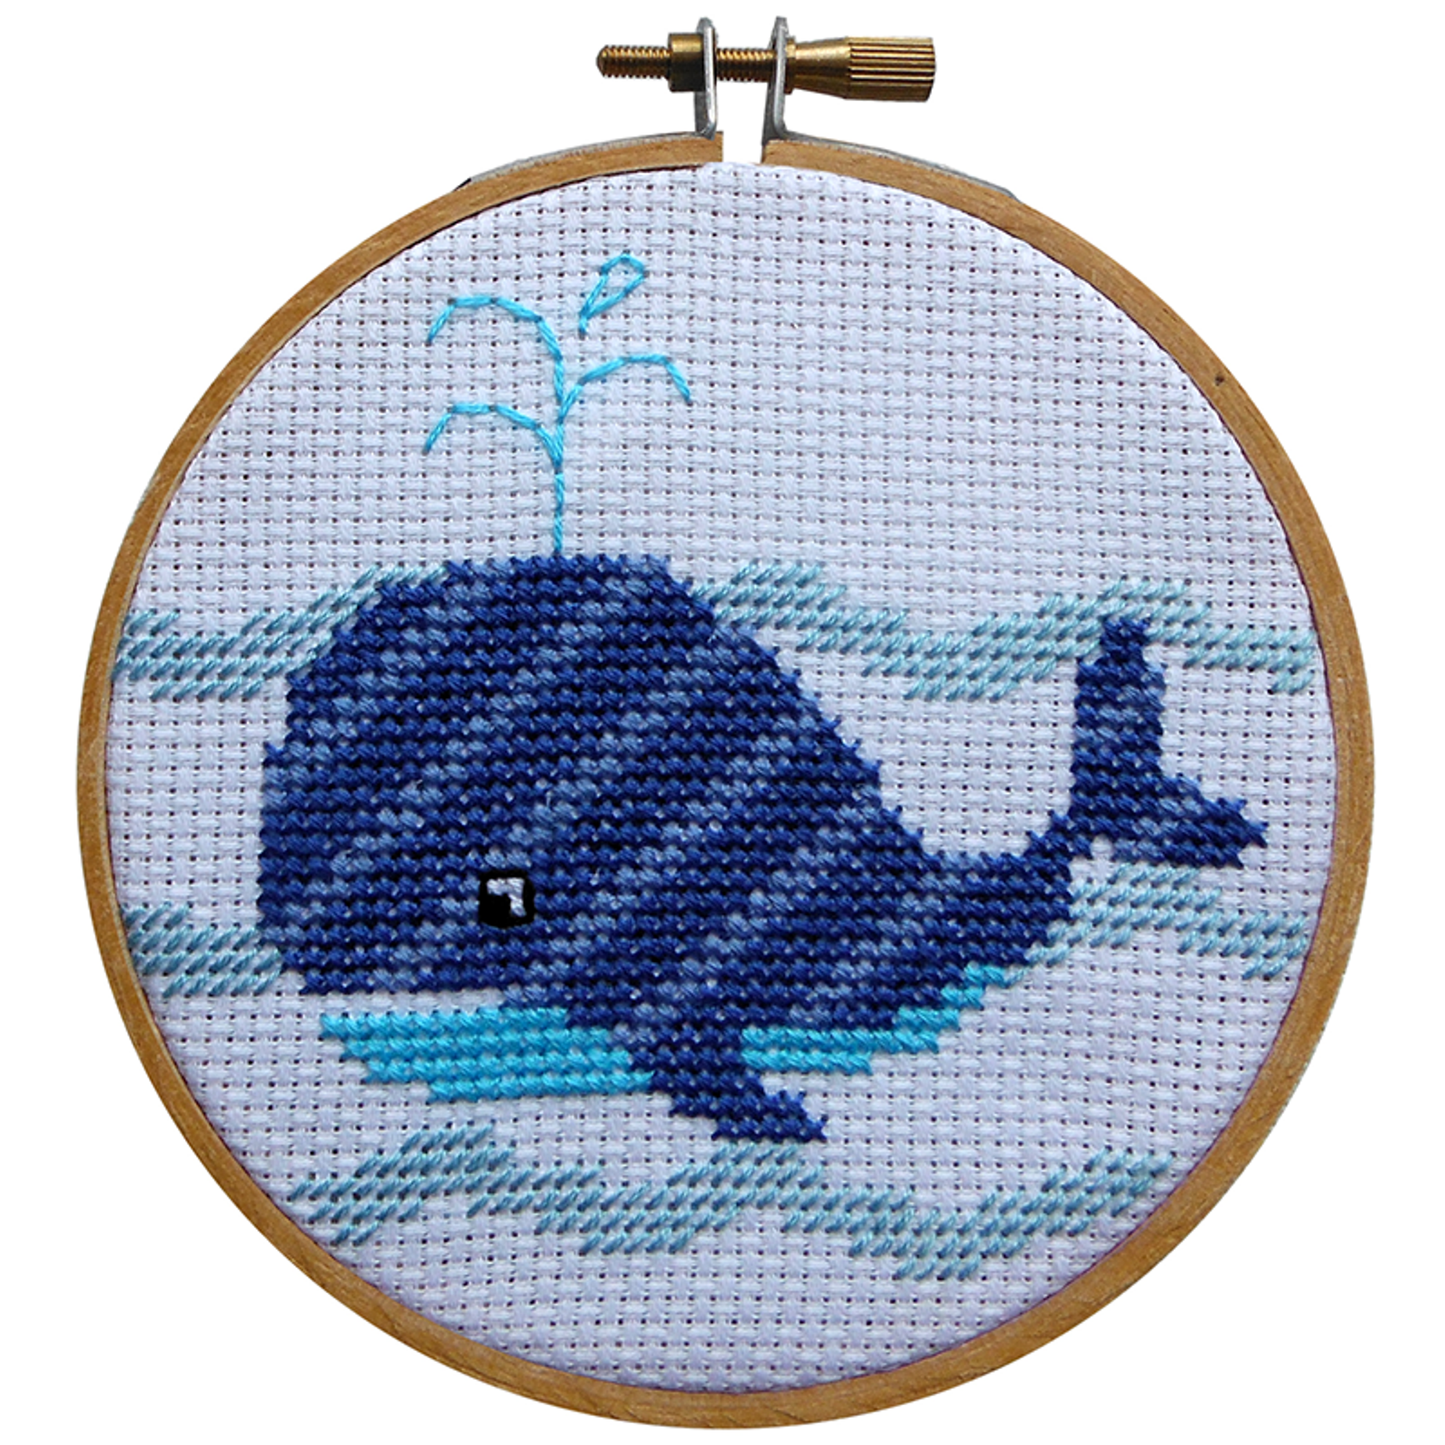 Cross stitch whale with DMC threads, hoop, 14 count Aida craft kit suit beginners